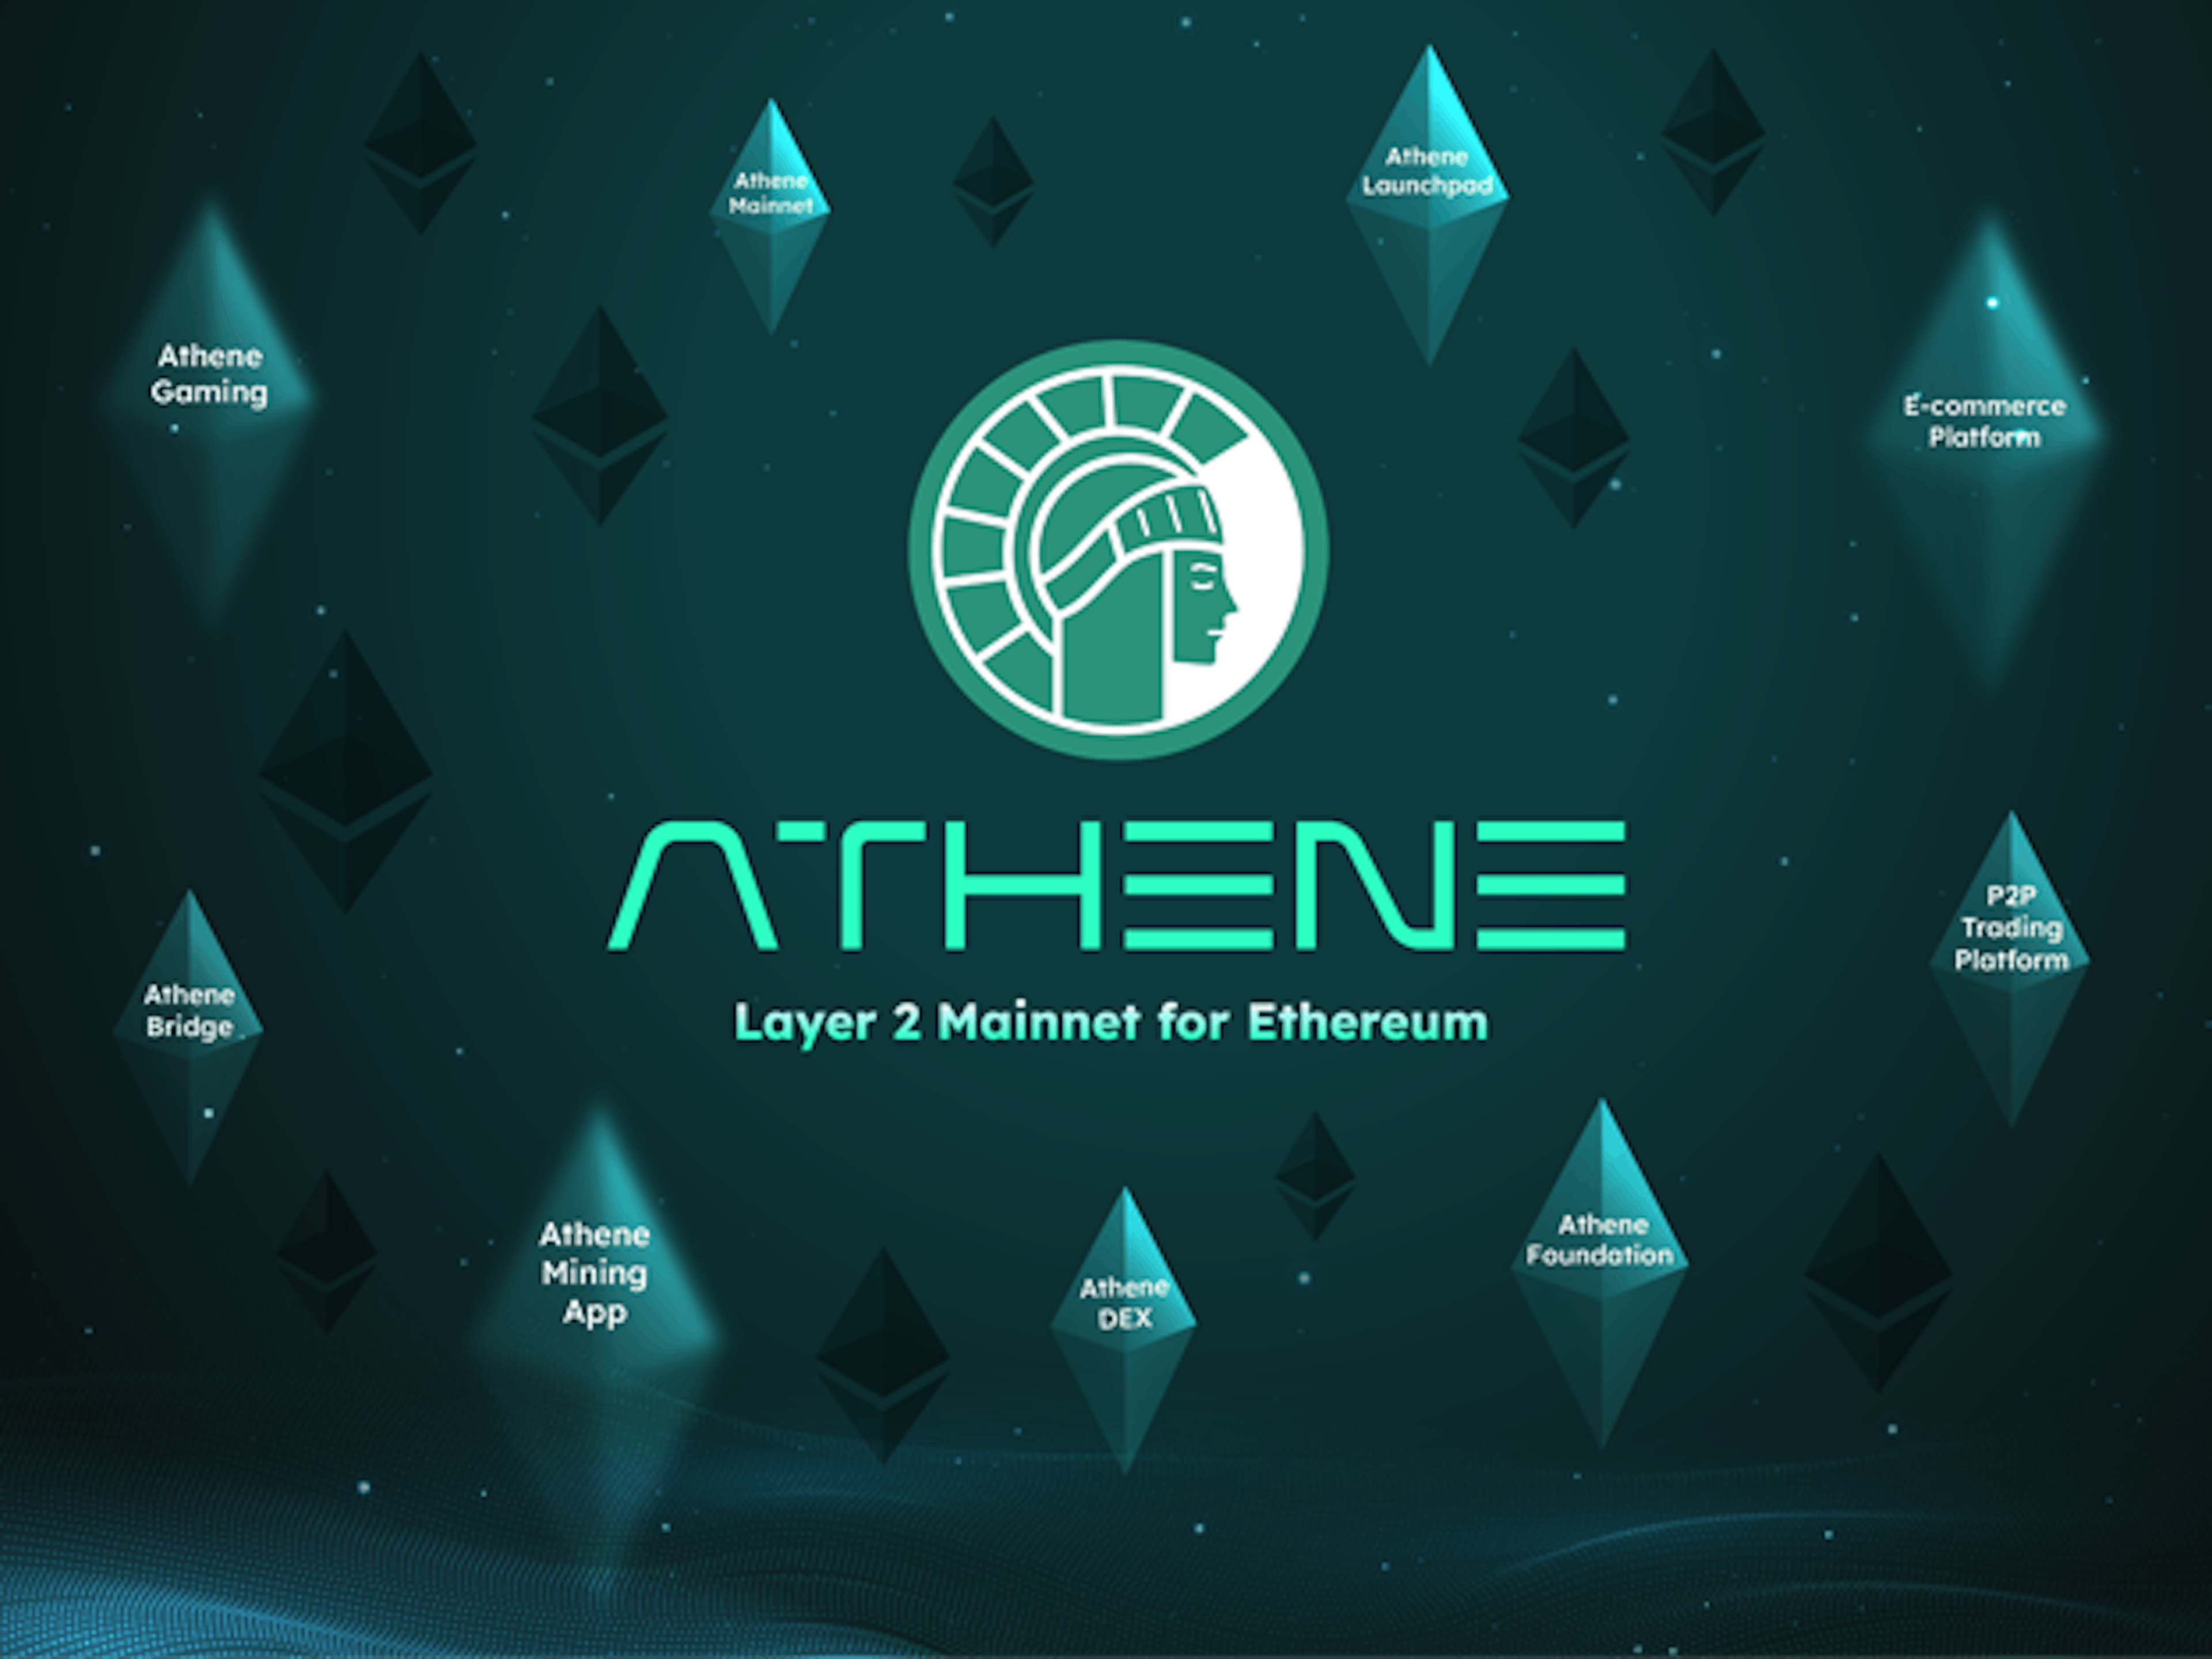 /athene-network-ath-network-rising-star-in-mobile-mining-amasses-nearly-4-million-users feature image